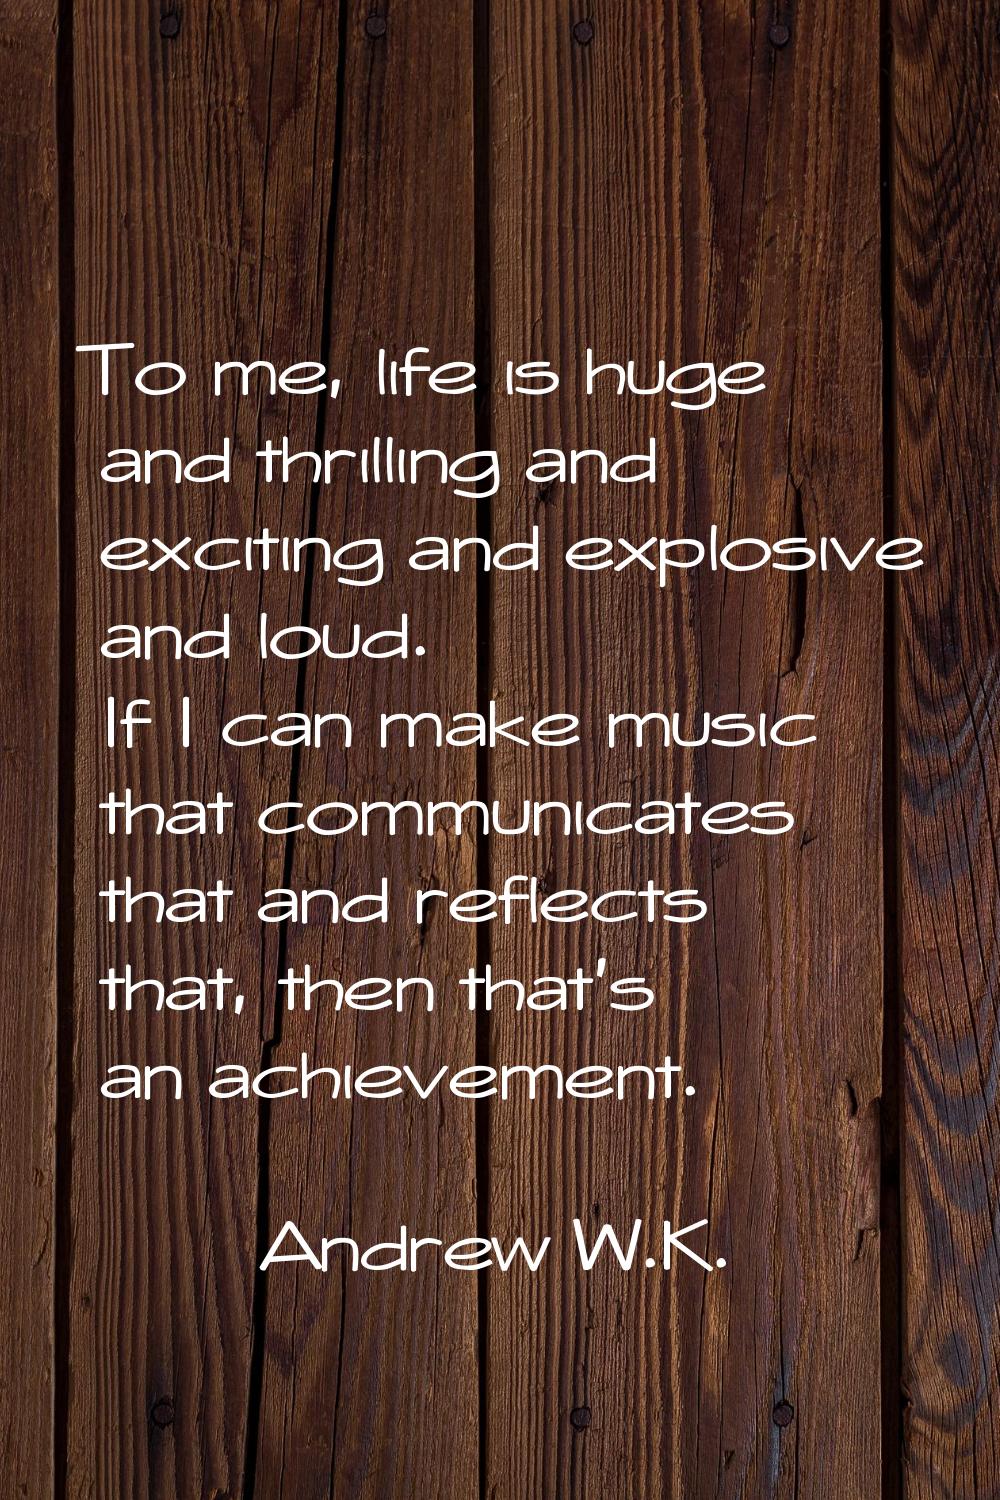 To me, life is huge and thrilling and exciting and explosive and loud. If I can make music that com